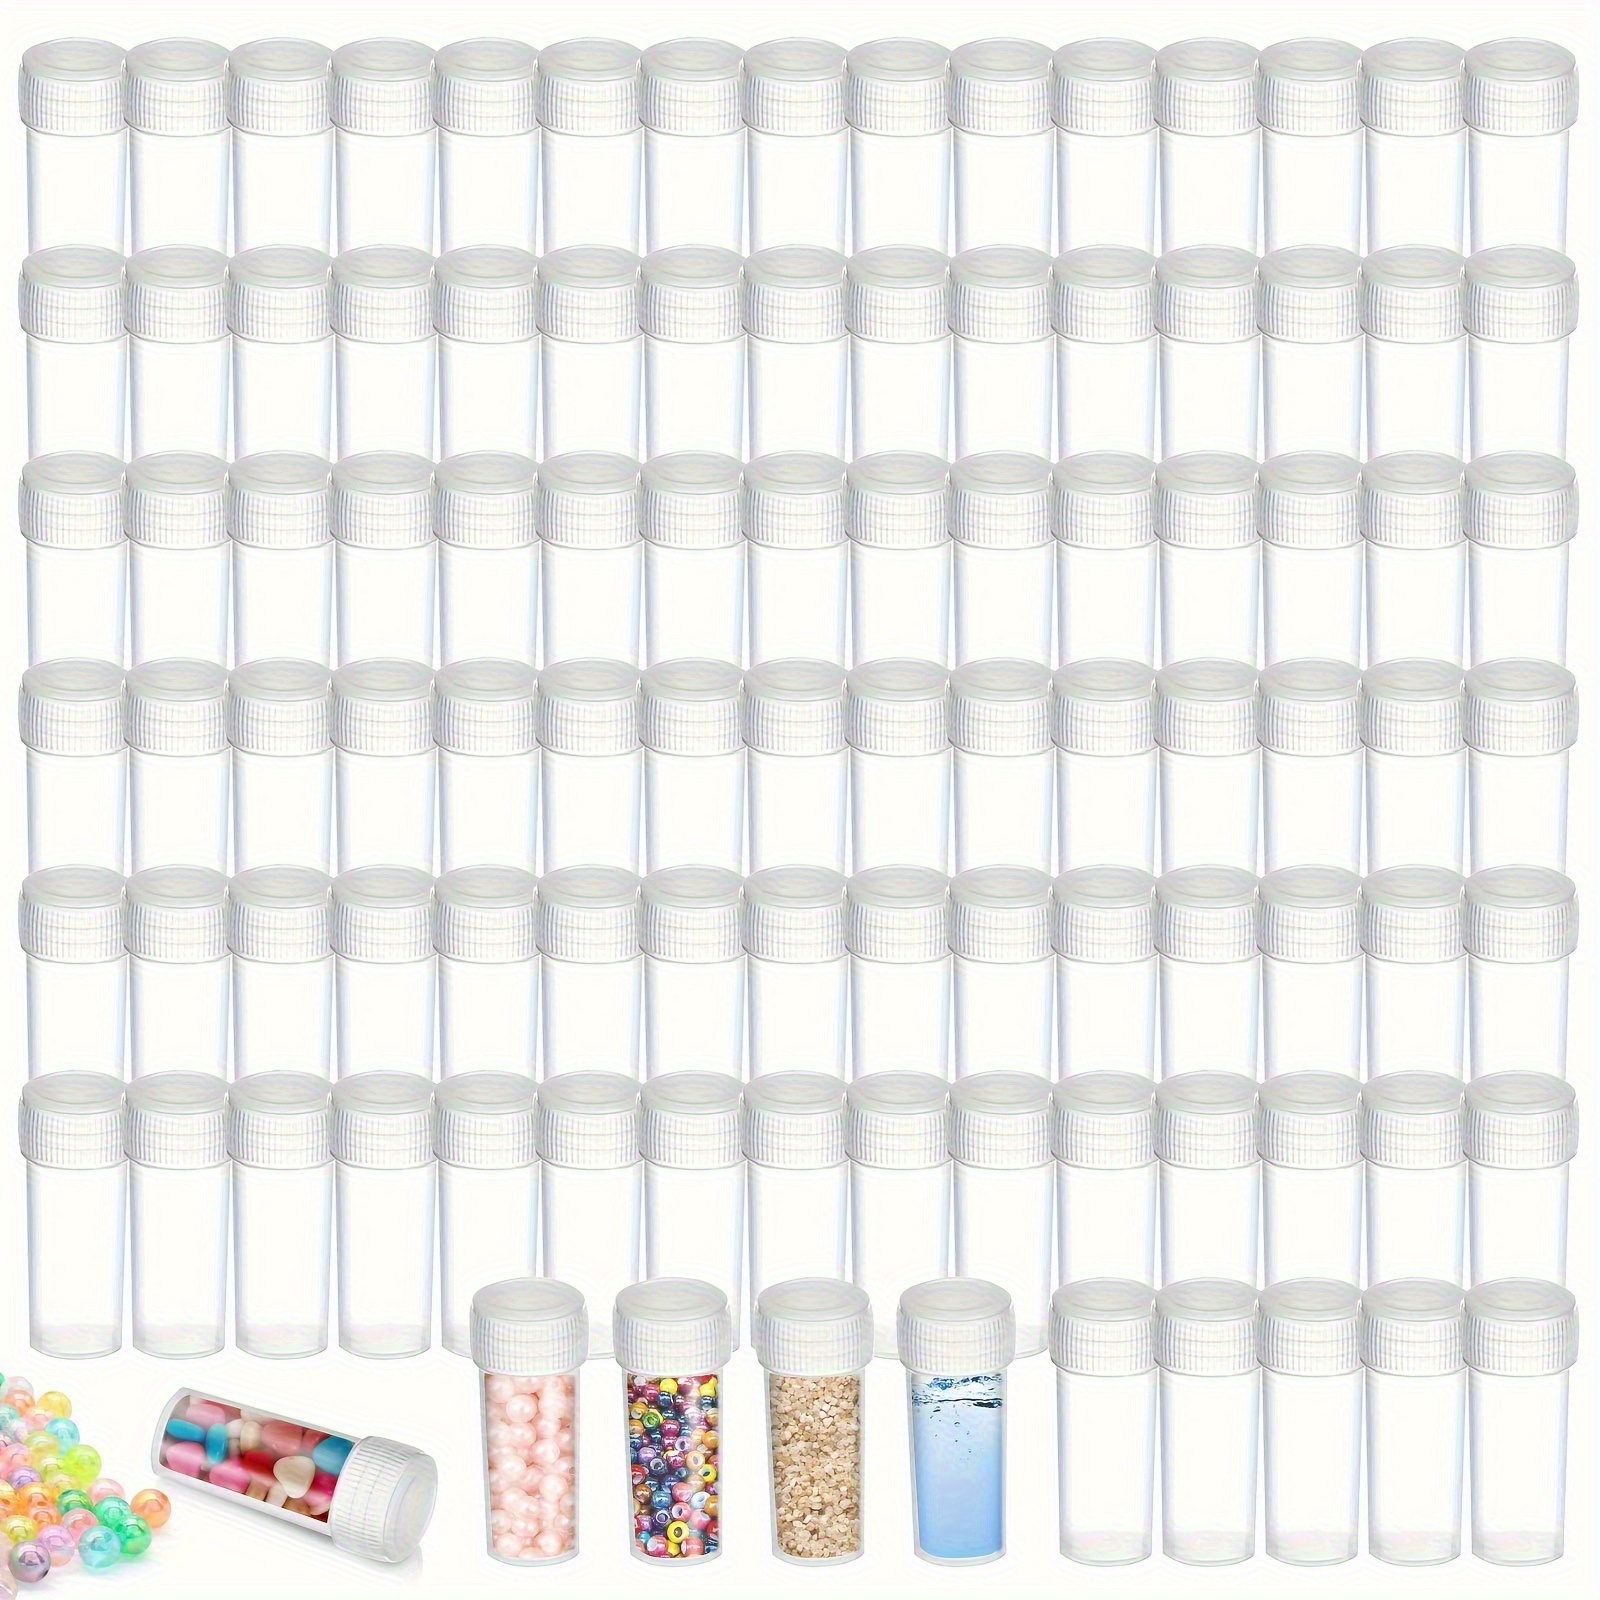 

Hicarer 100pcs 5 Ml Plastic Sample Bottles, Mini Clear Storage Bottles With Lid Suitable For Accessories Parts Small Items